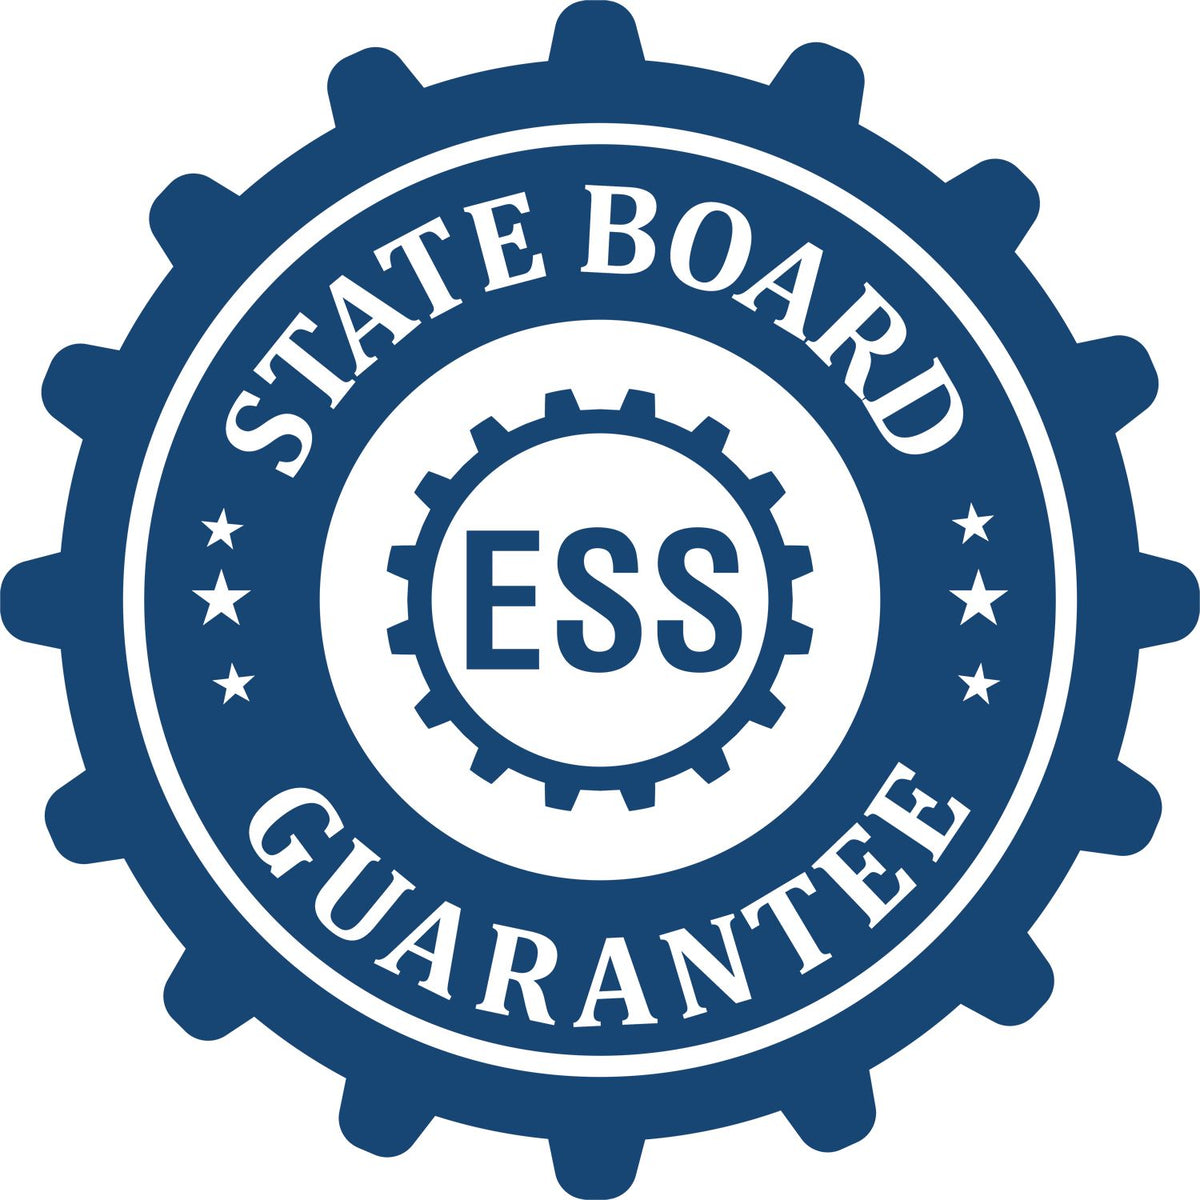 An emblem in a gear shape illustrating a state board guarantee for the Heavy-Duty Alabama Rectangular Notary Stamp product.